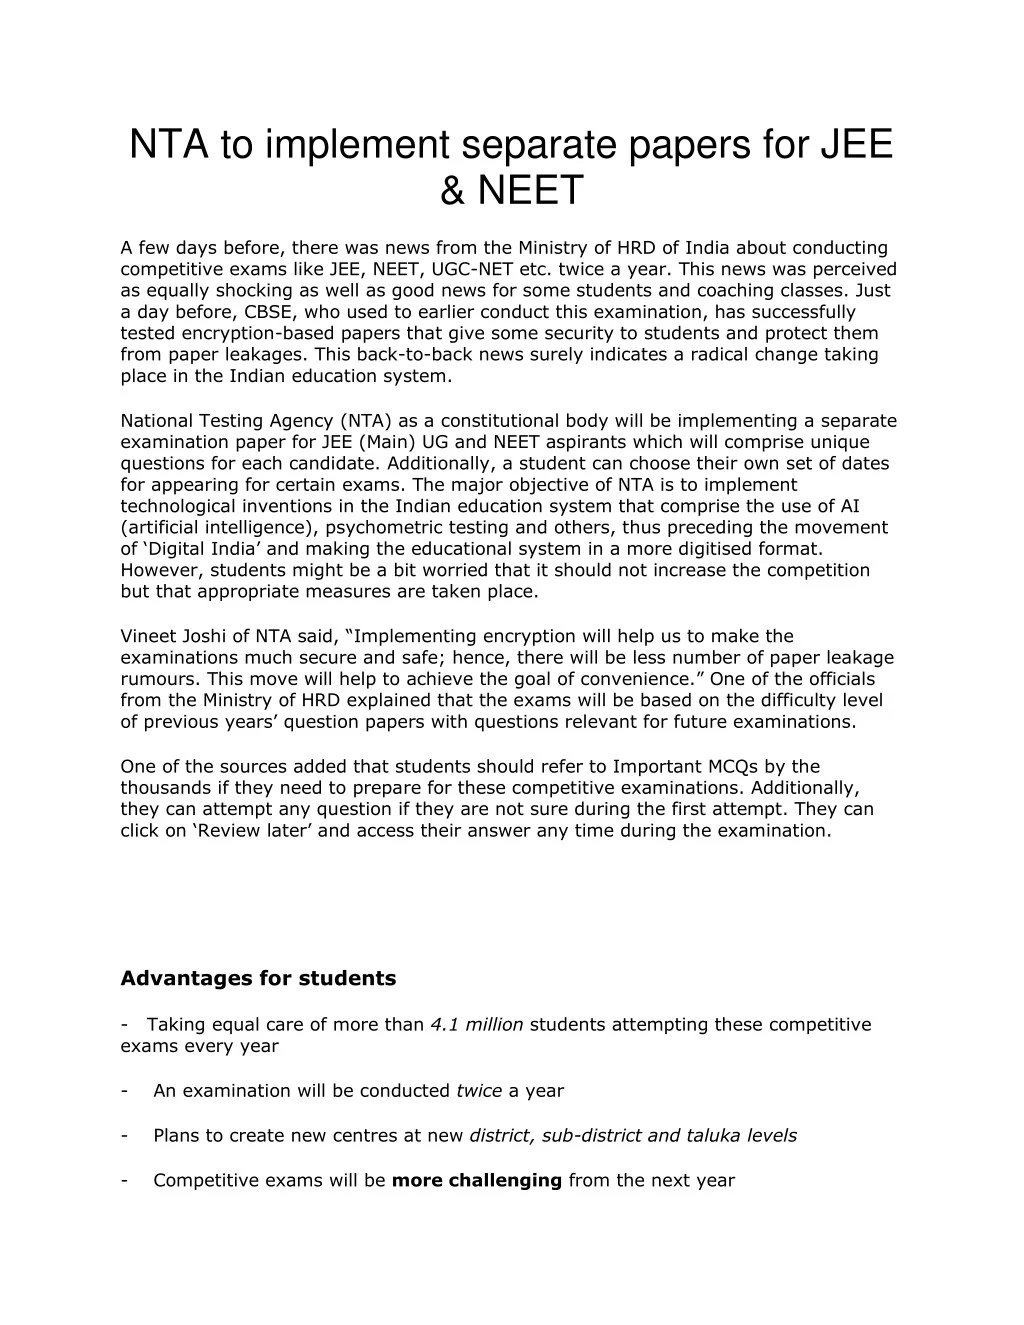 nta to implement separate papers for jee neet